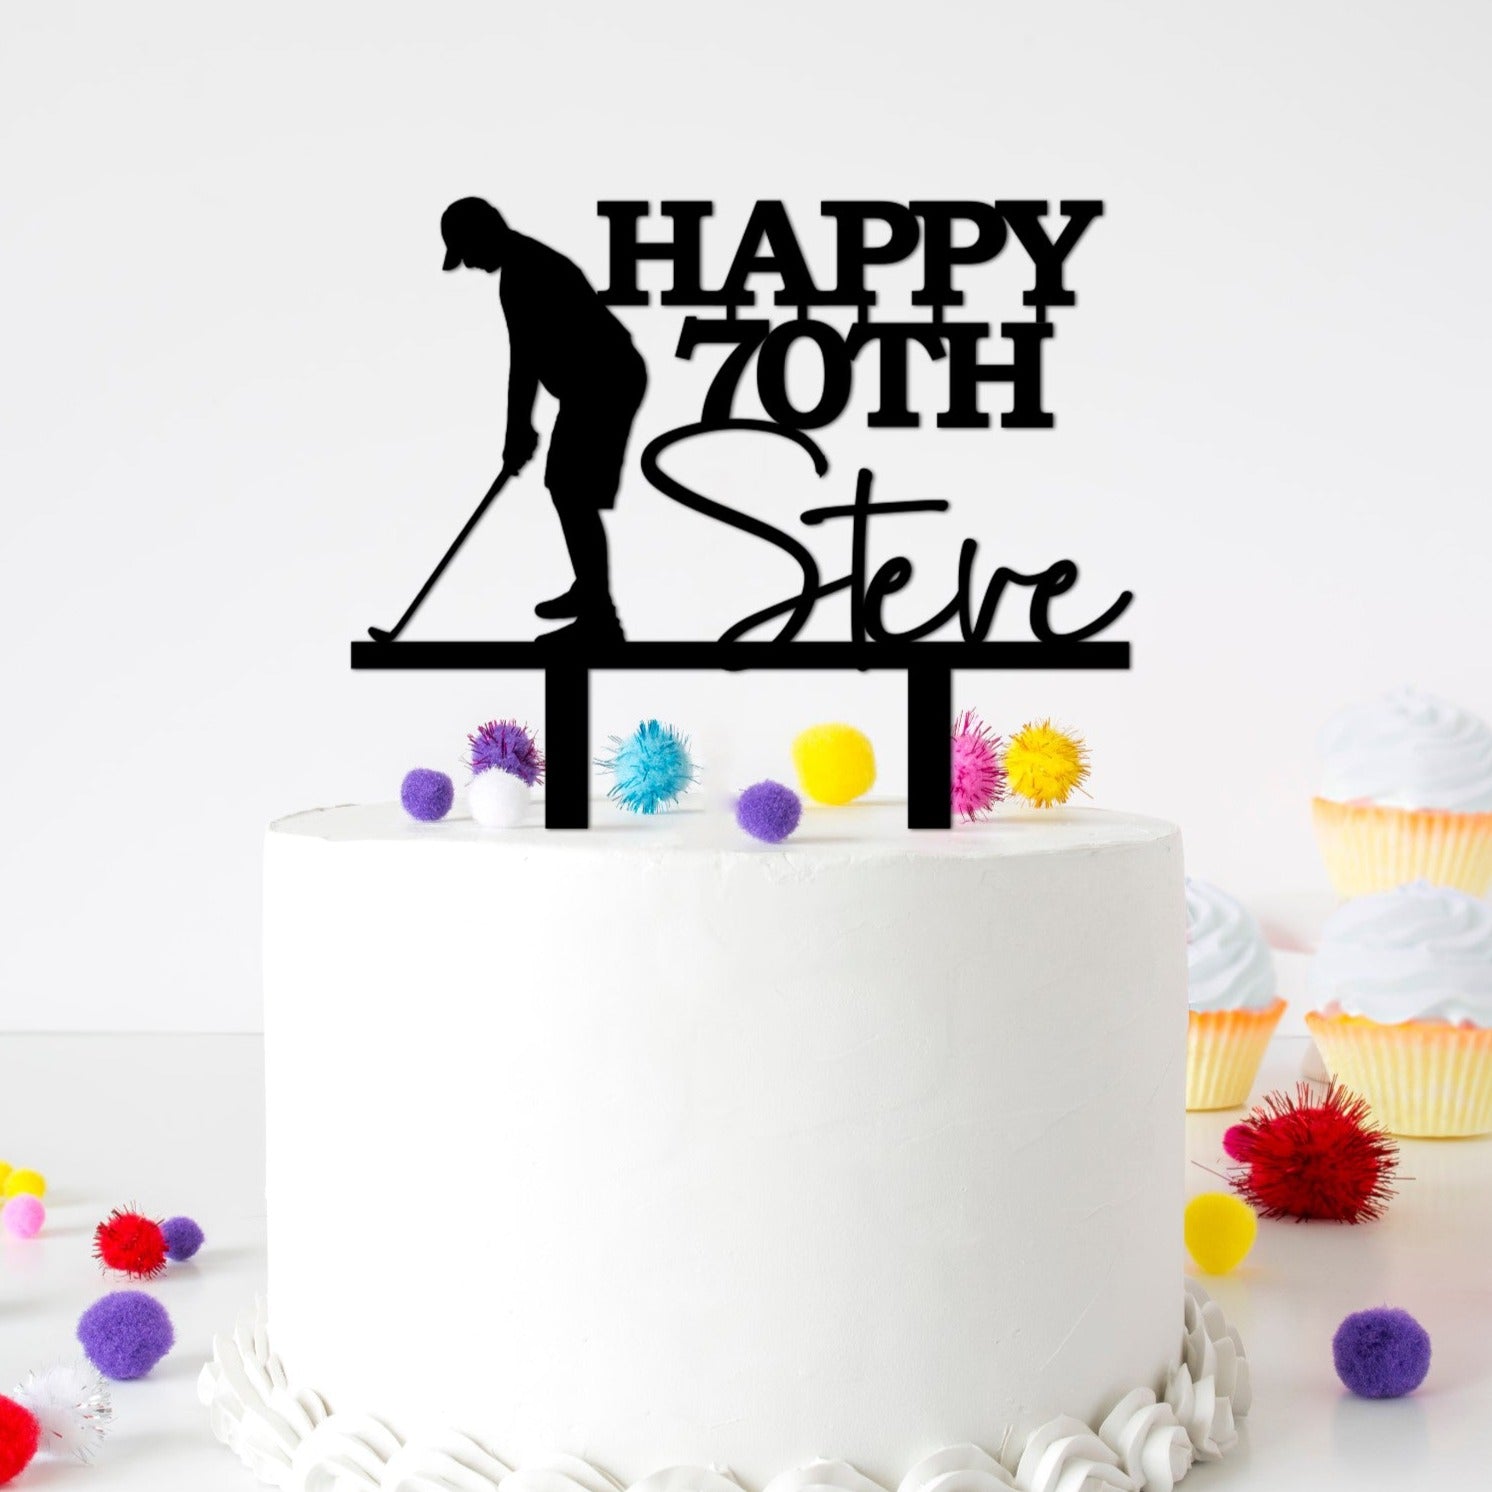 Cake Topper of a golfer about to swing that says happy 70th Steve